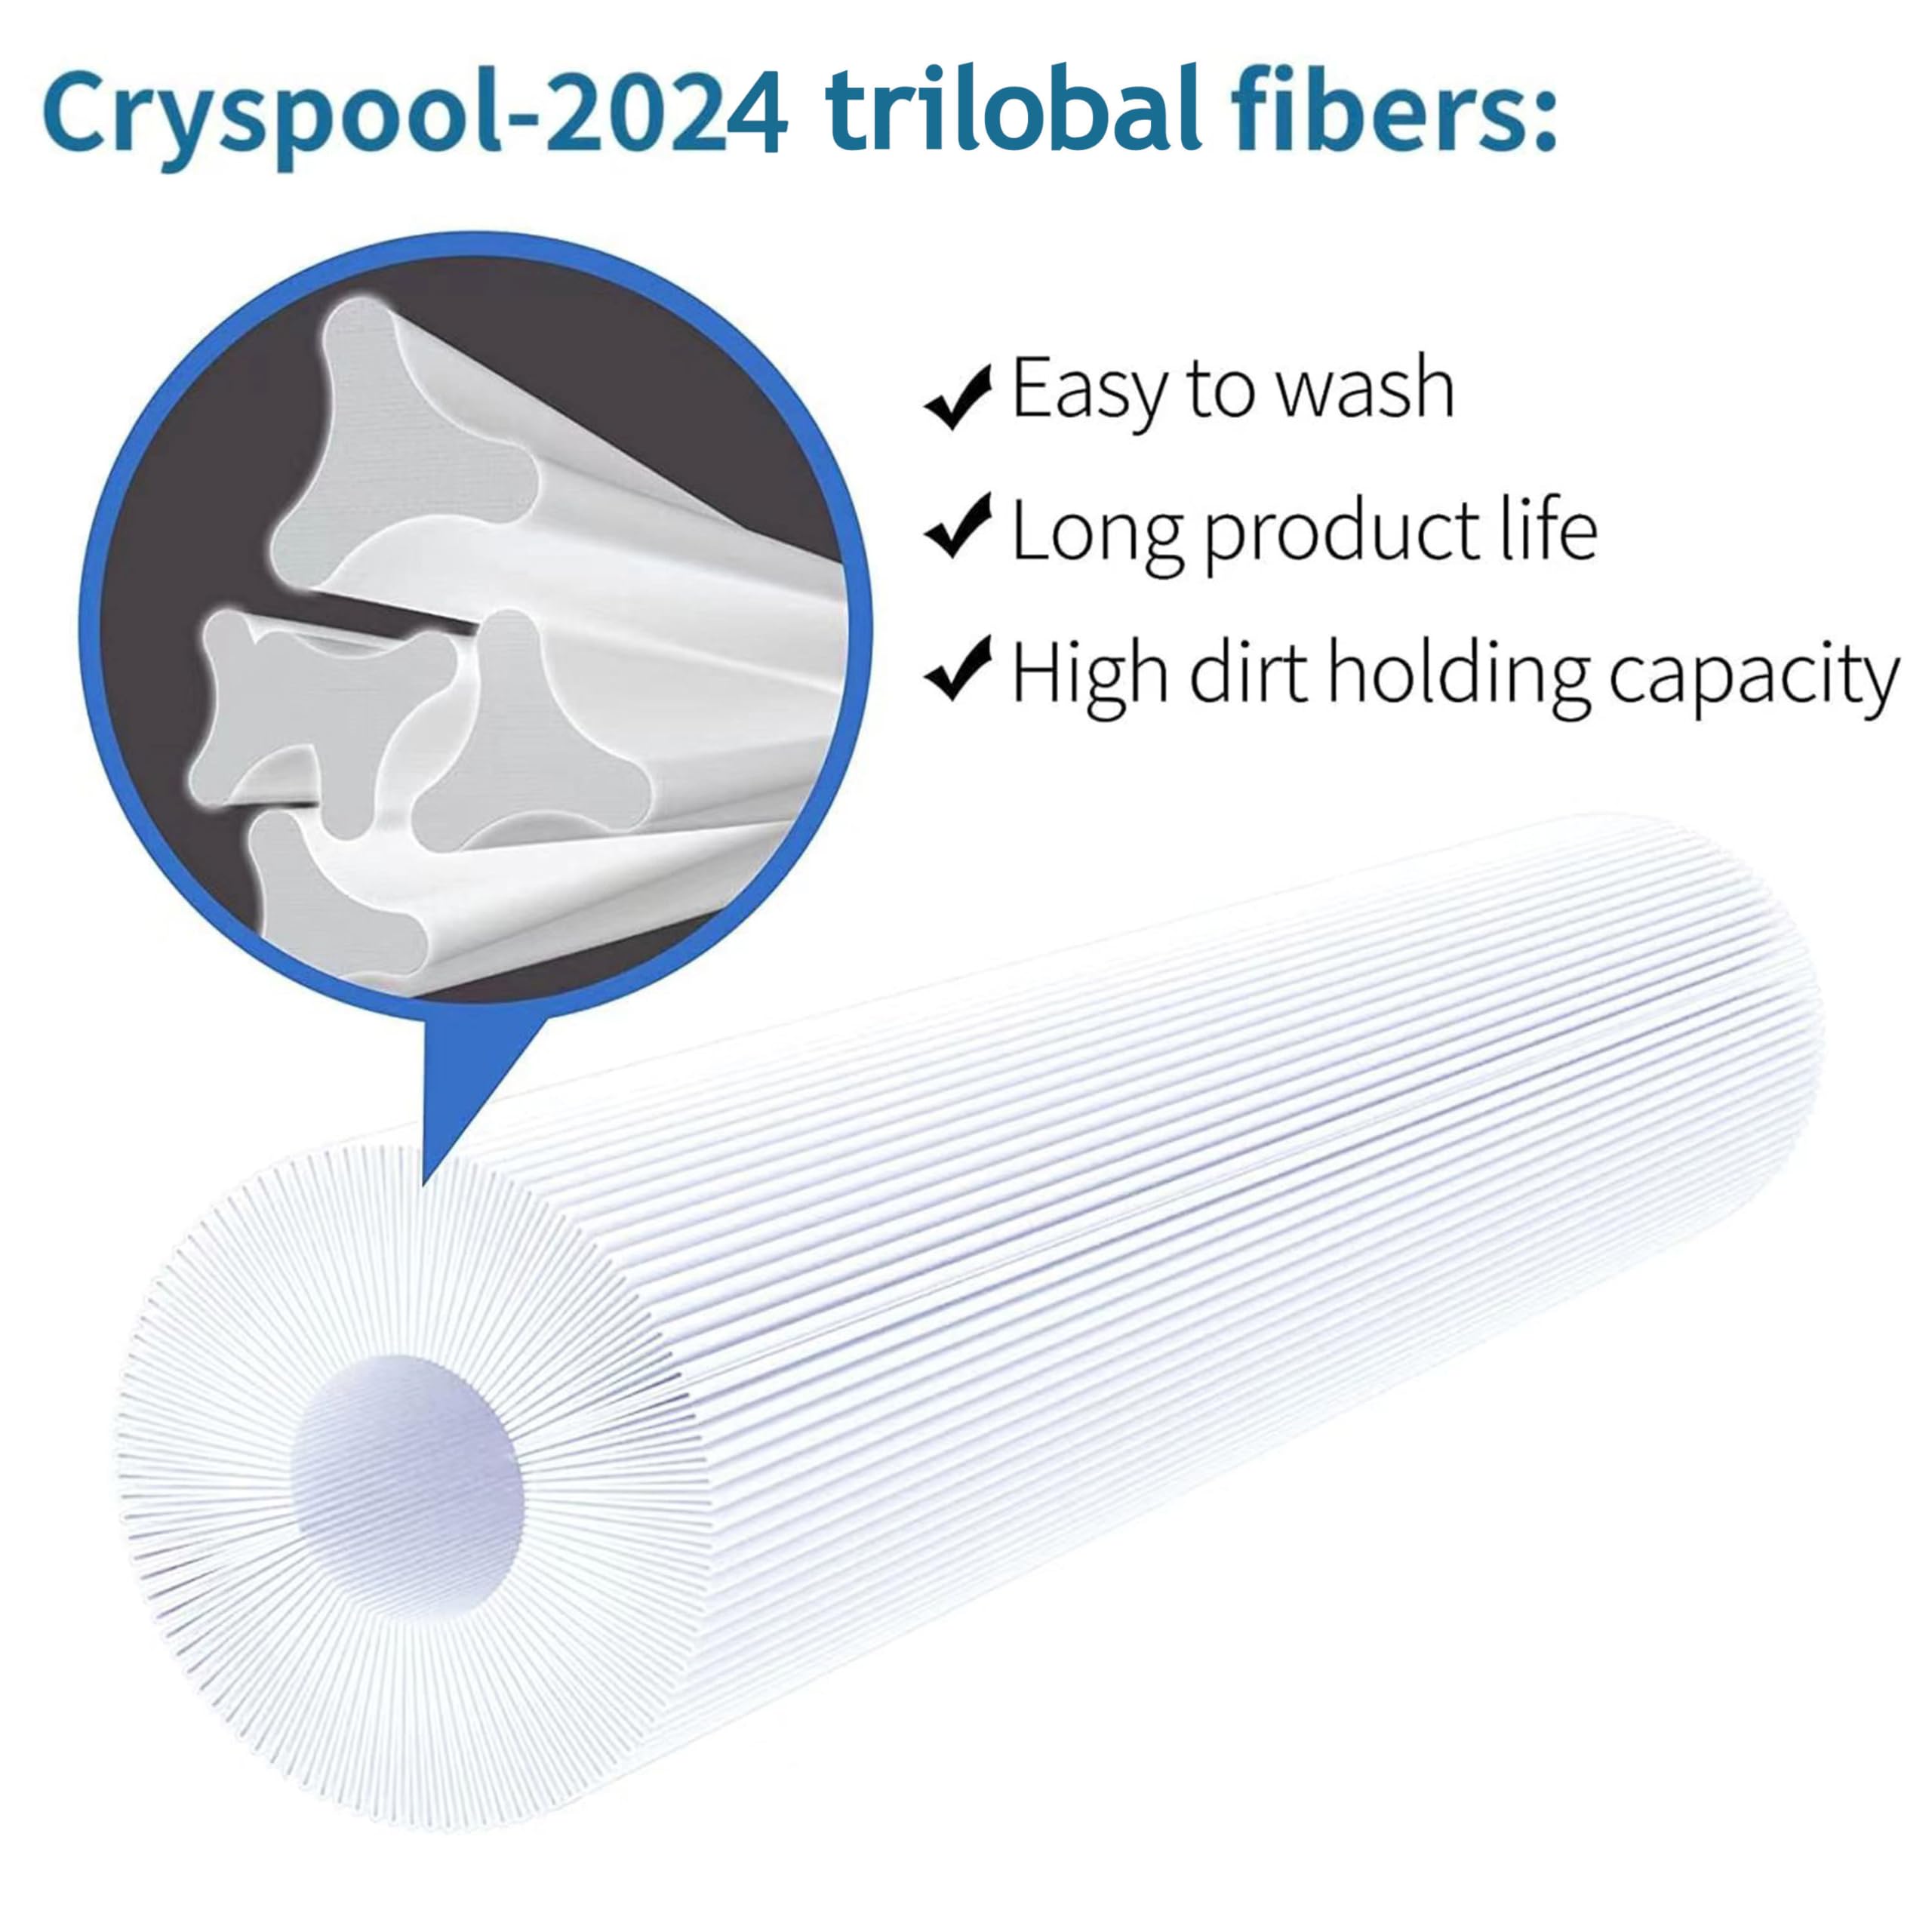 Cryspool 2" MPT-Thread Spa Filter Compatible with Tuff spa Filter, Del Sol Spas, Sundance Spas 6540-723,5CH-402, FC-2811, South Pacific Spas 40 sq.ft hot tub Filter, 2 Pack